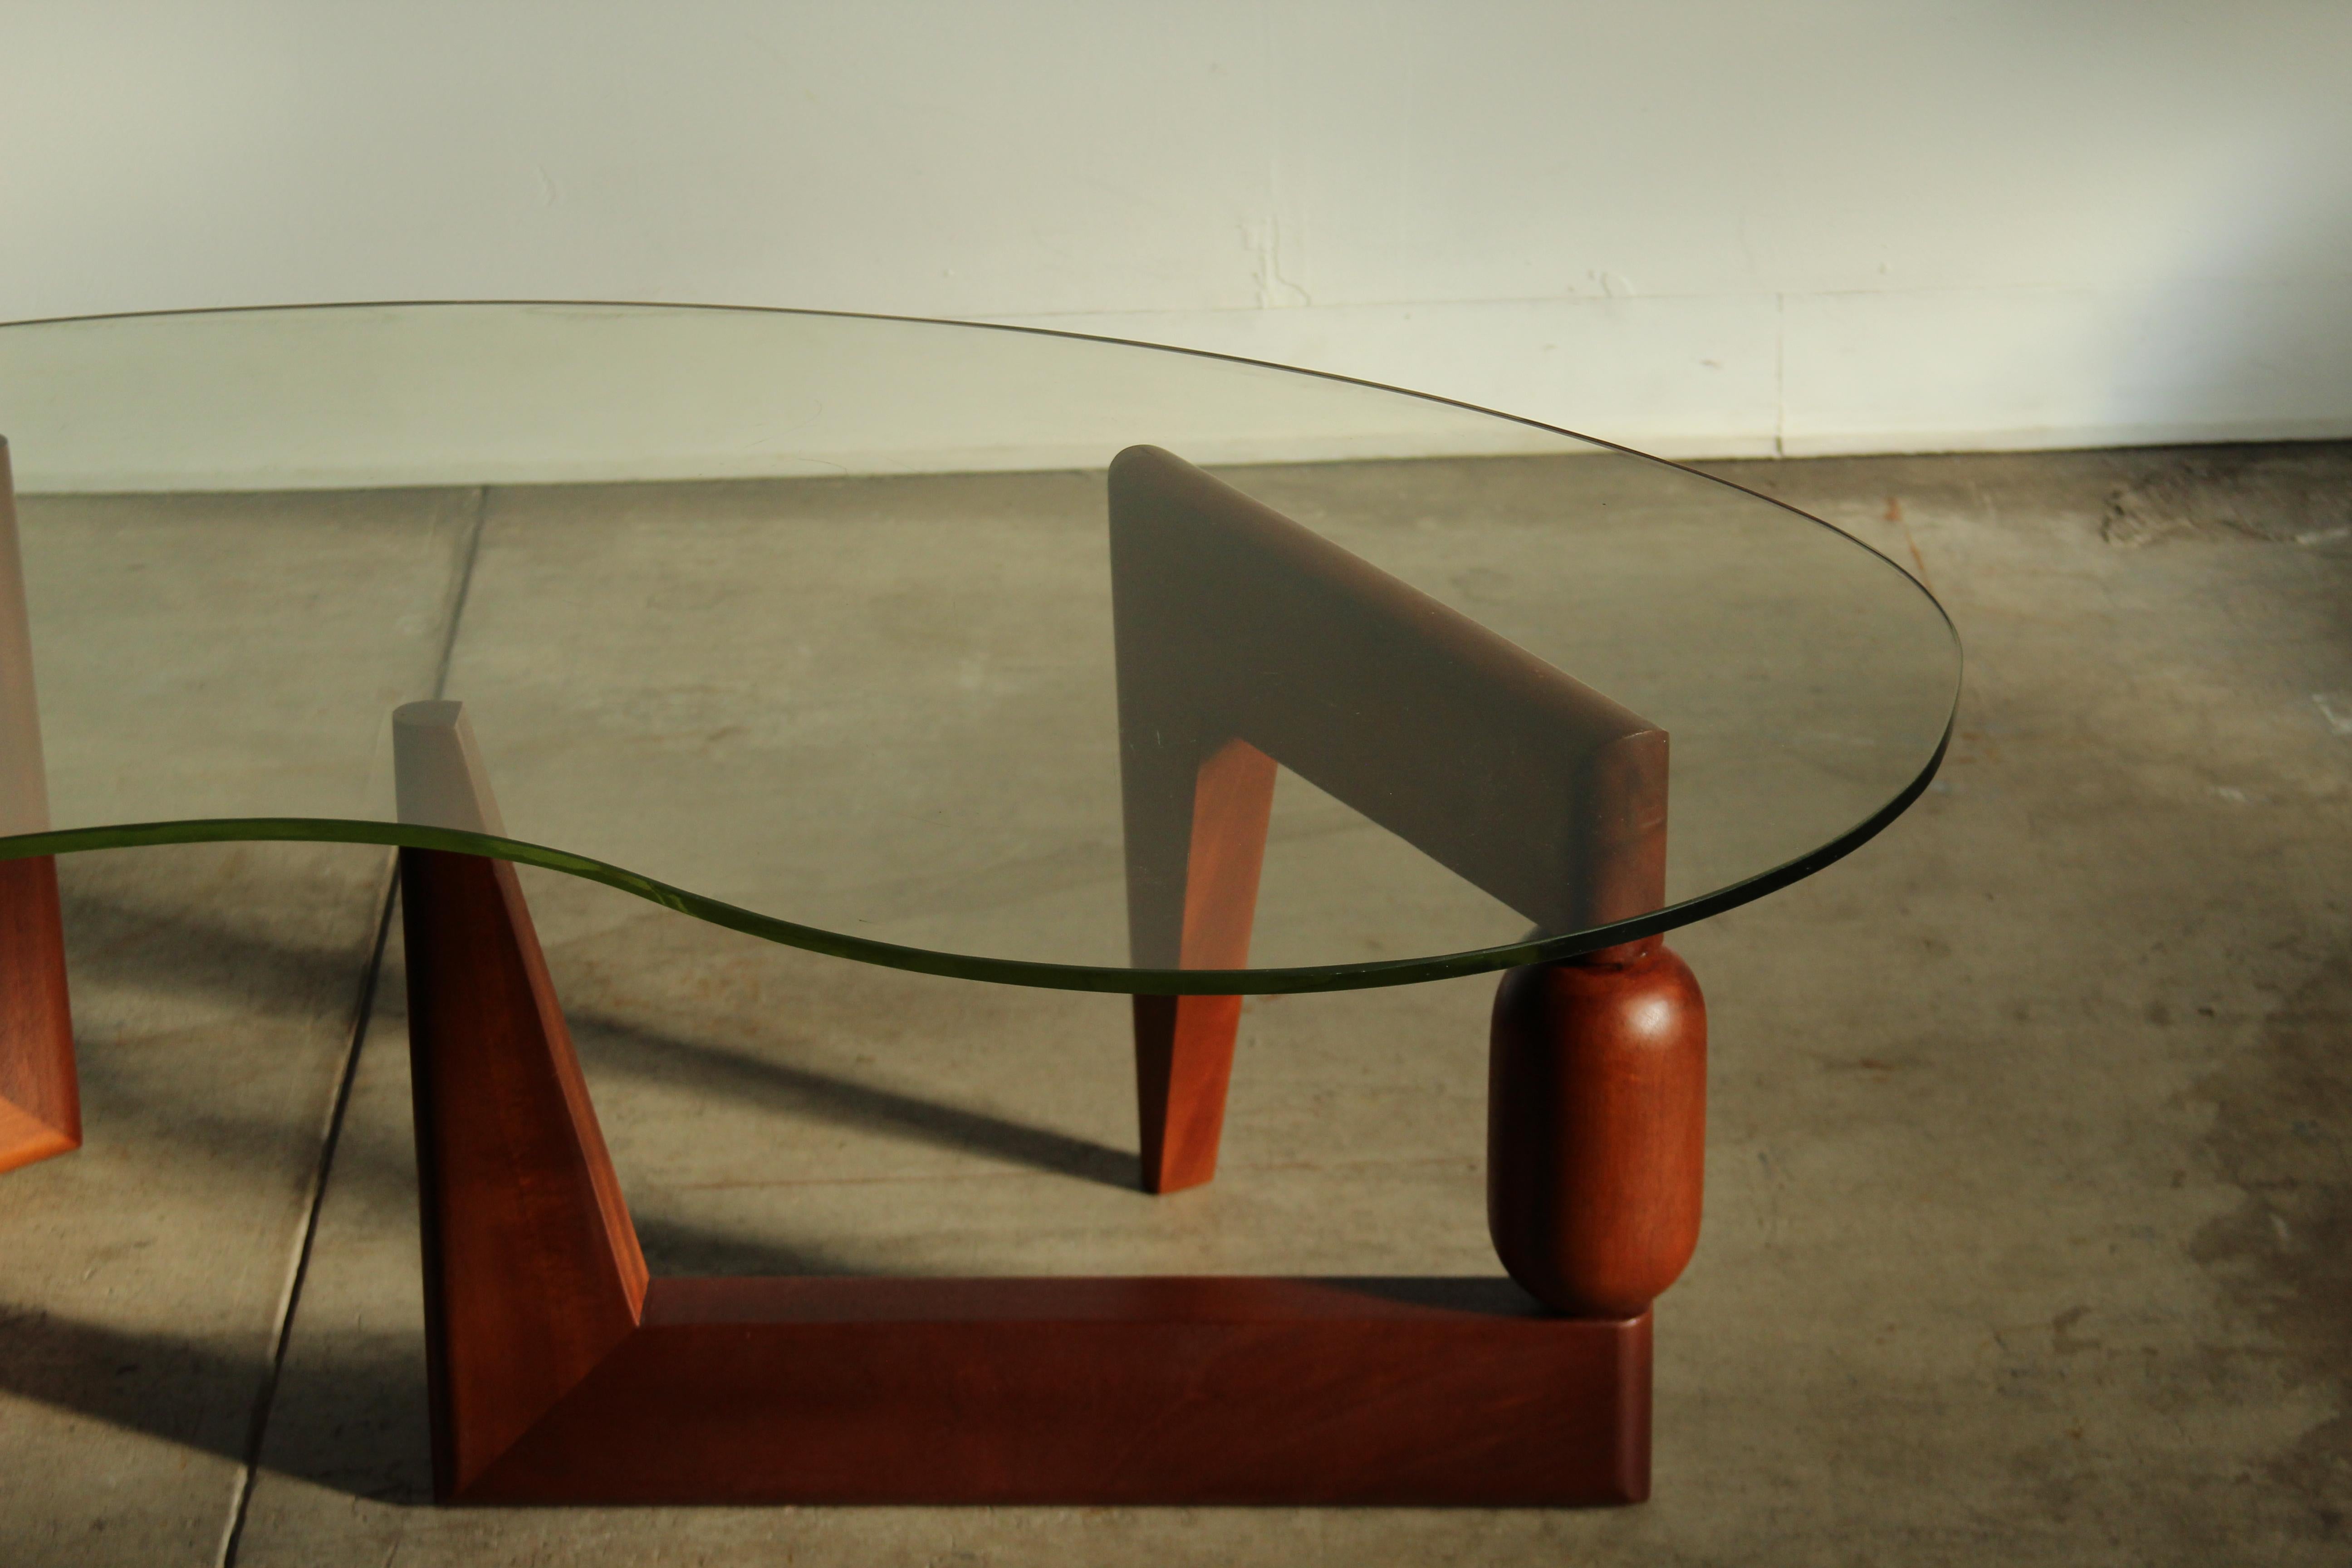 Sculptural Freeform Coffee Table in the Manner of Isamu Noguchi, 1970s For Sale 2